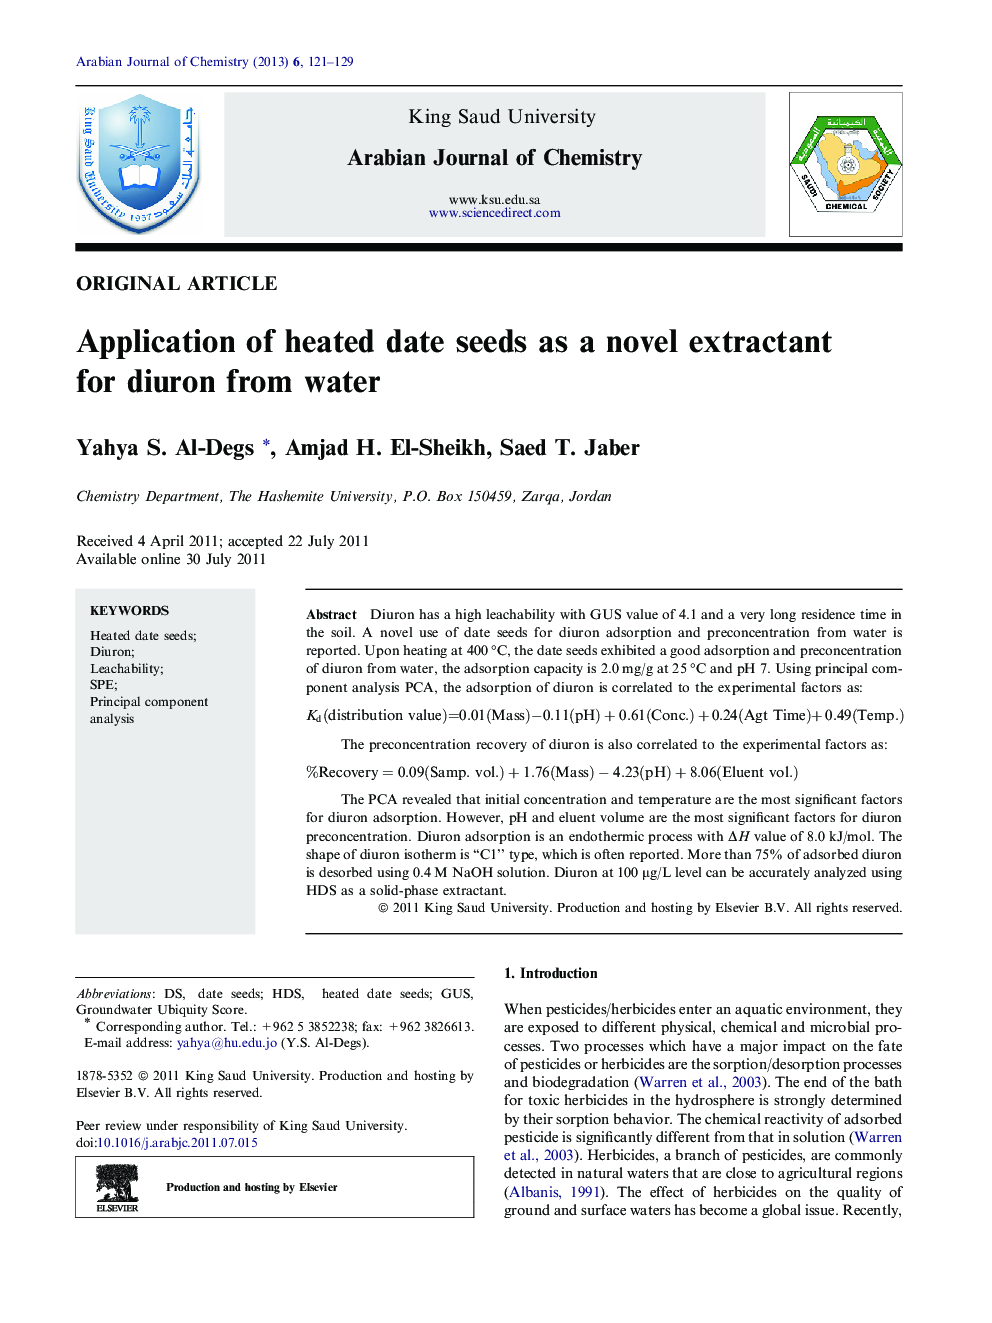 Application of heated date seeds as a novel extractant for diuron from water 